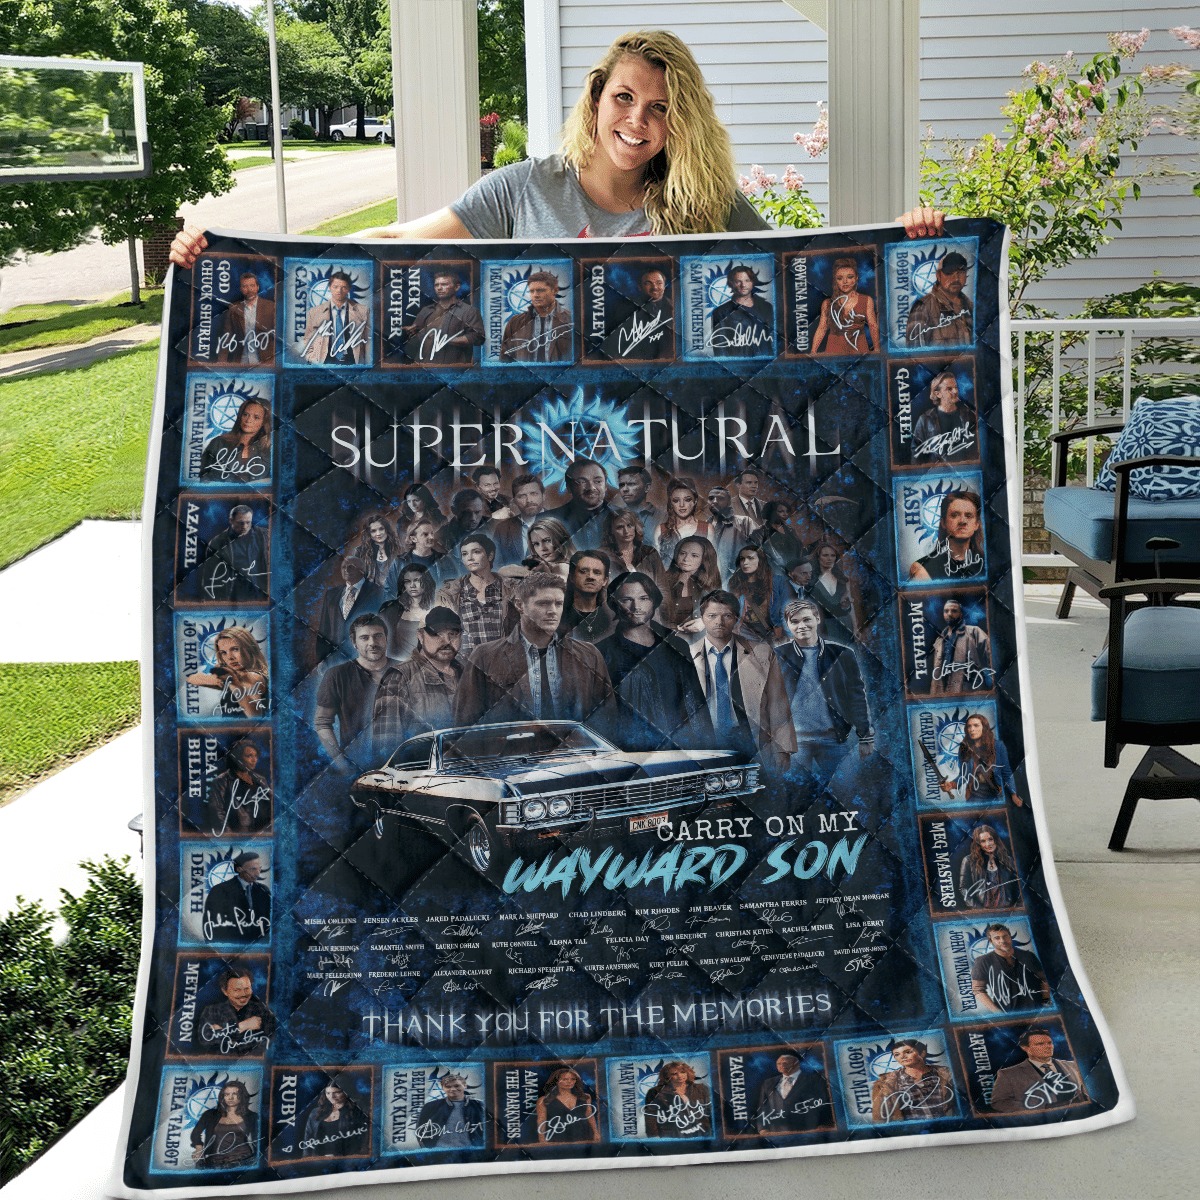 NEW Thank you for the memories Supernatural quilt 4